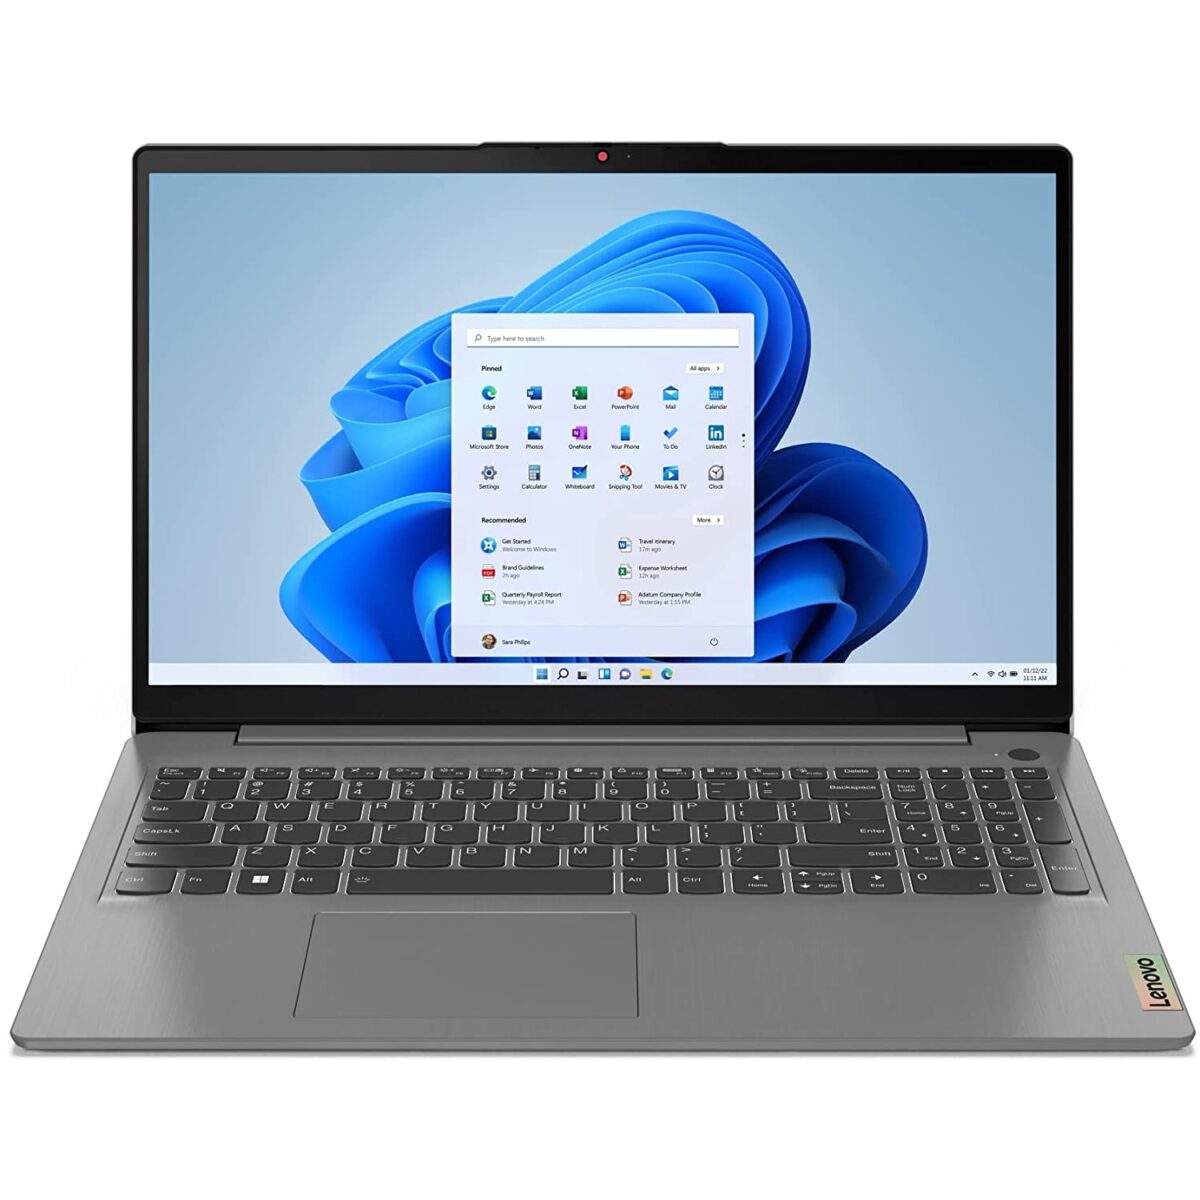 Lenovo IdeaPad Slim 3 82RK006DIN with 12th Gen Intel Core i3-1215U Launched in India